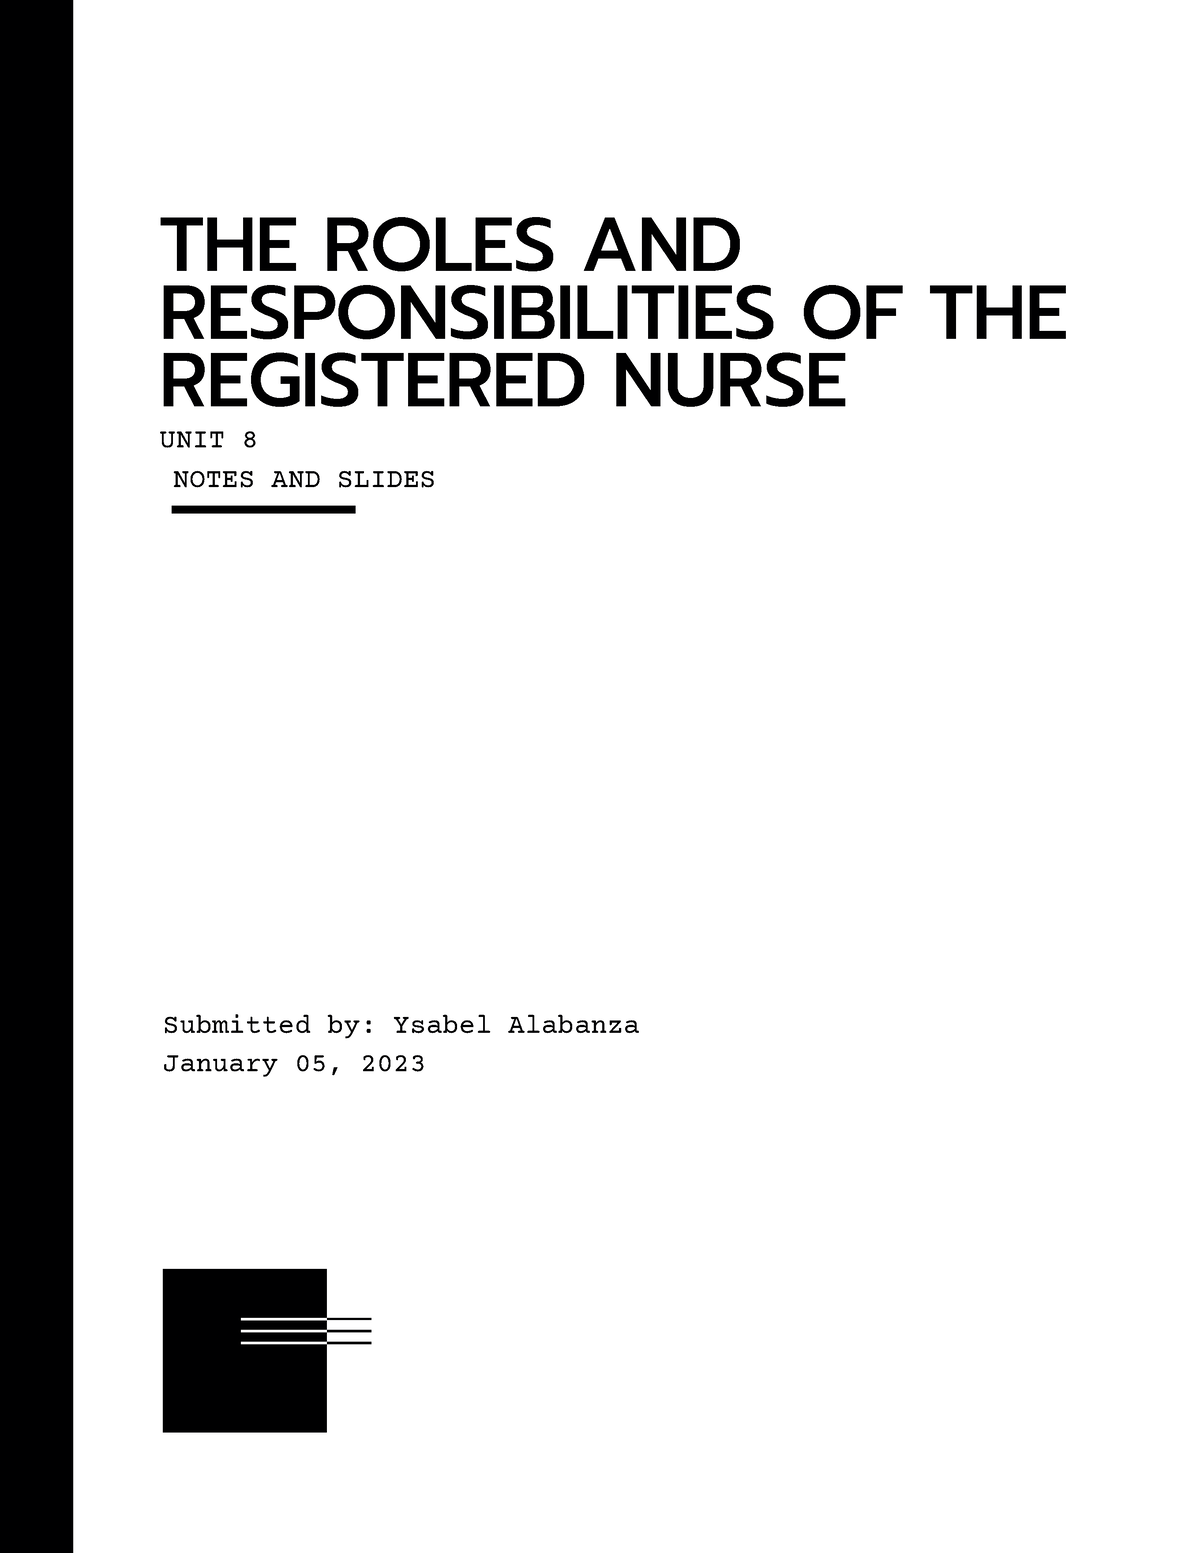 What Are the Everyday Roles and Responsibilities of a Nurse?